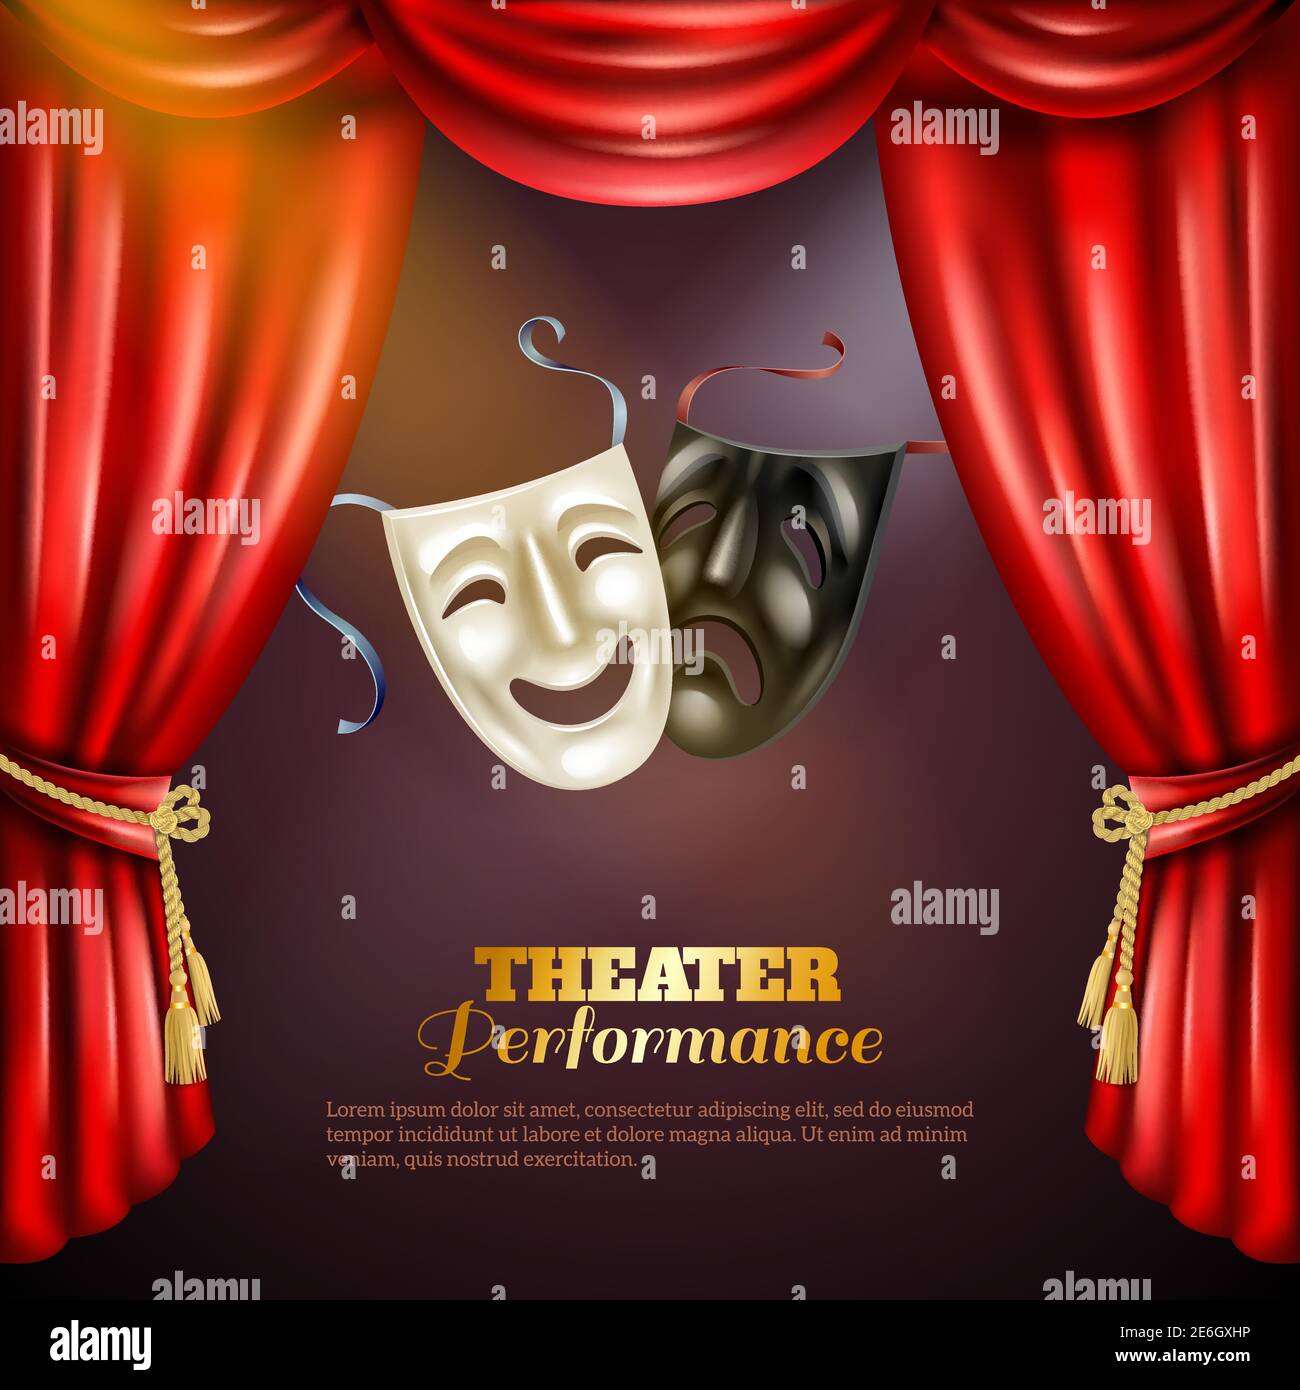 Theatre performance realistic background with comedy and tragedy masks vector illustration Stock Vector